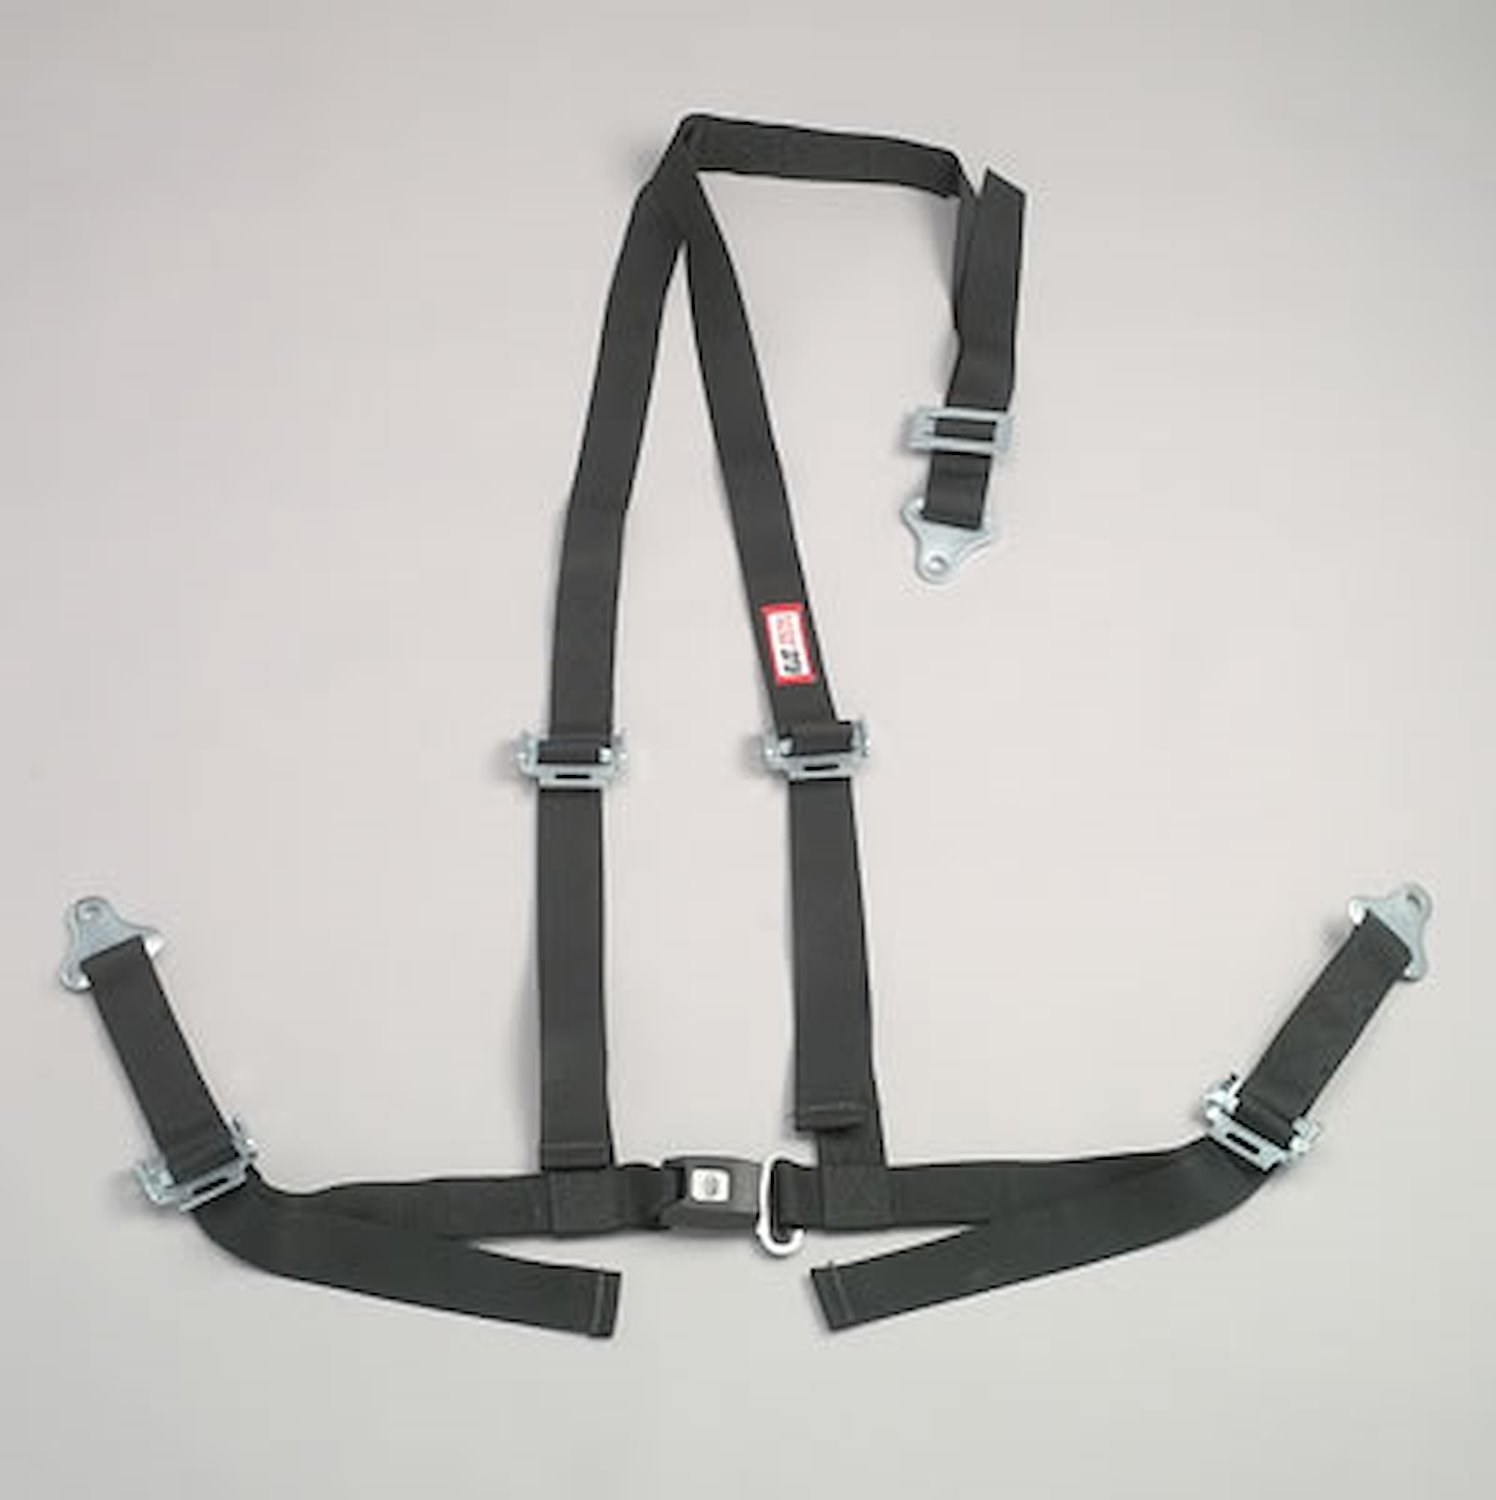 NON-SFI B&T HARNESS 2 PULL UP Lap Belt 2 S. H. V ROLL BAR Mount ALL SNAP ENDS YELLOW